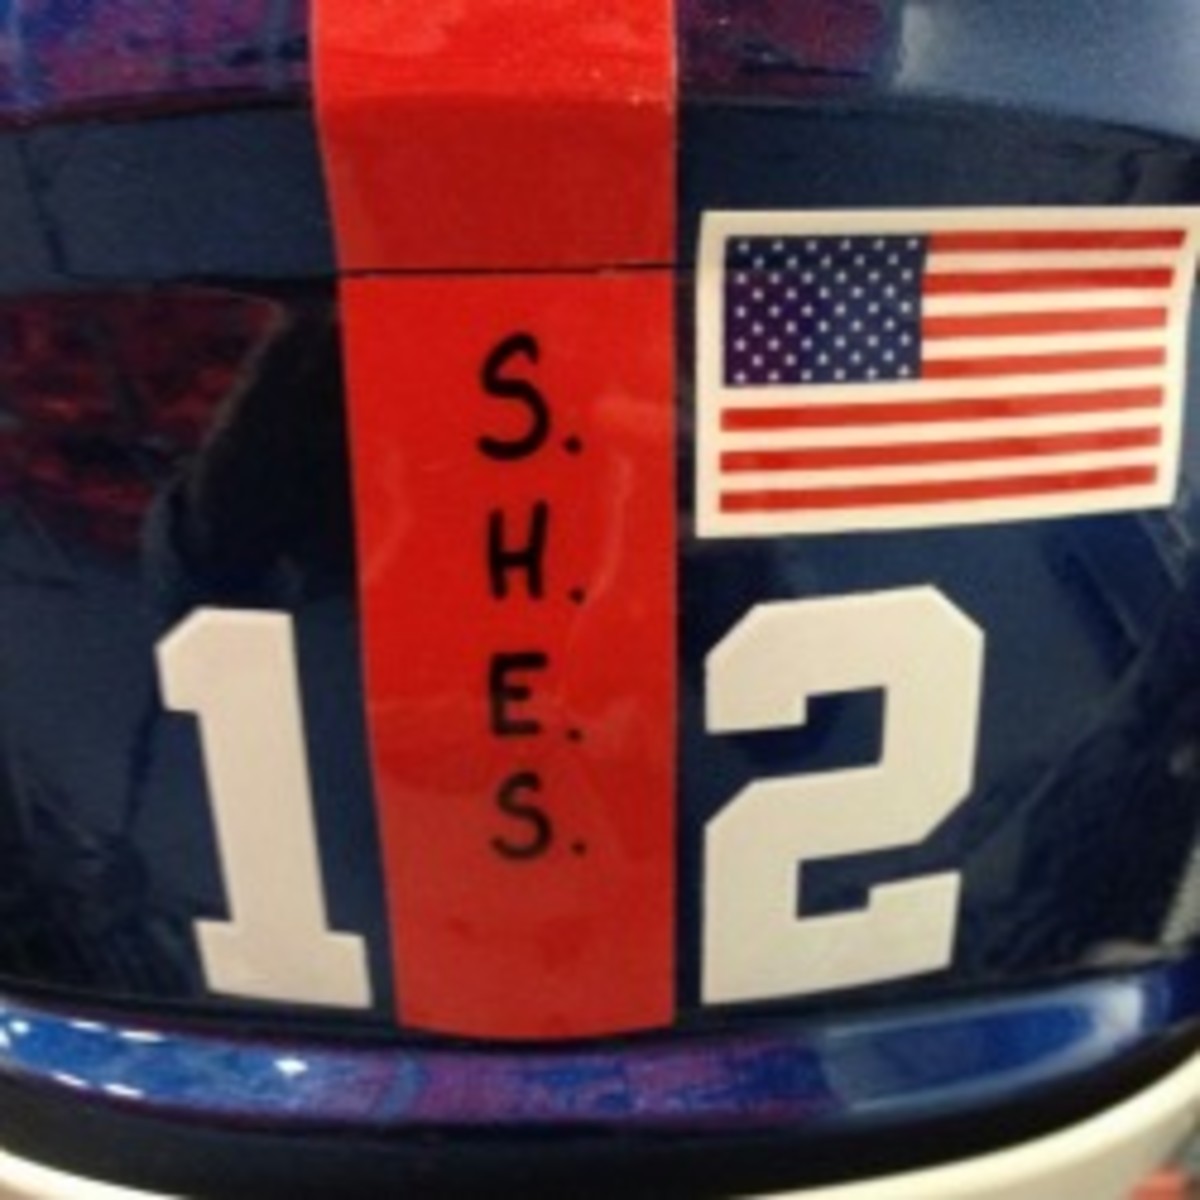 The Giants will wear Sandy Hook Elementary School decals on Sunday. (Picture courtesy of NY Giants Twitter page)